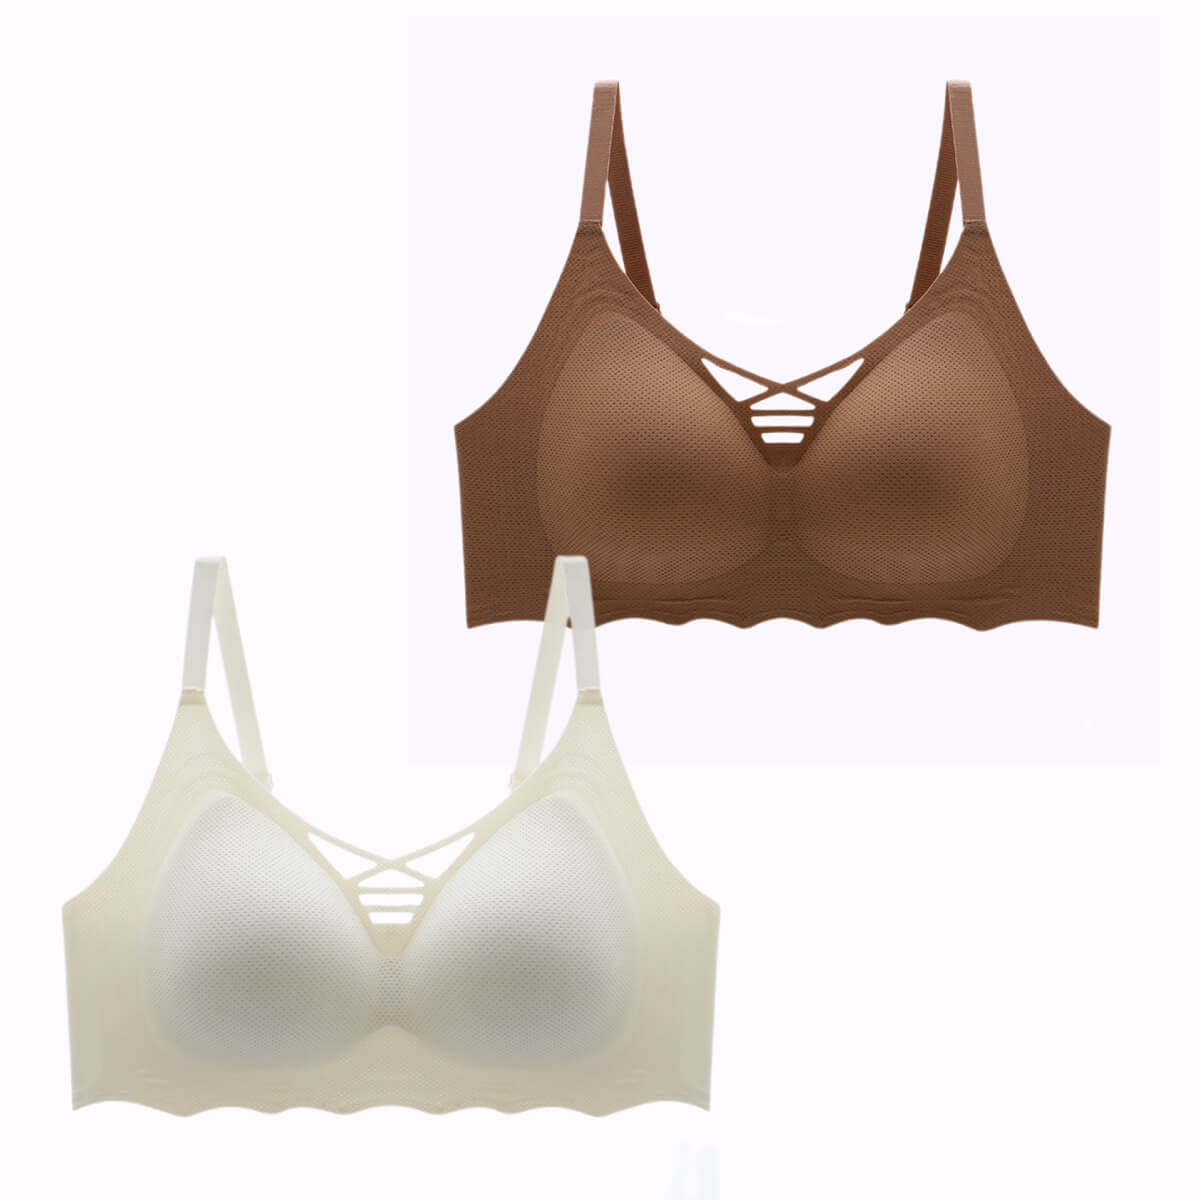 Smooth Curves Cotton Cup 2 Pack Bra